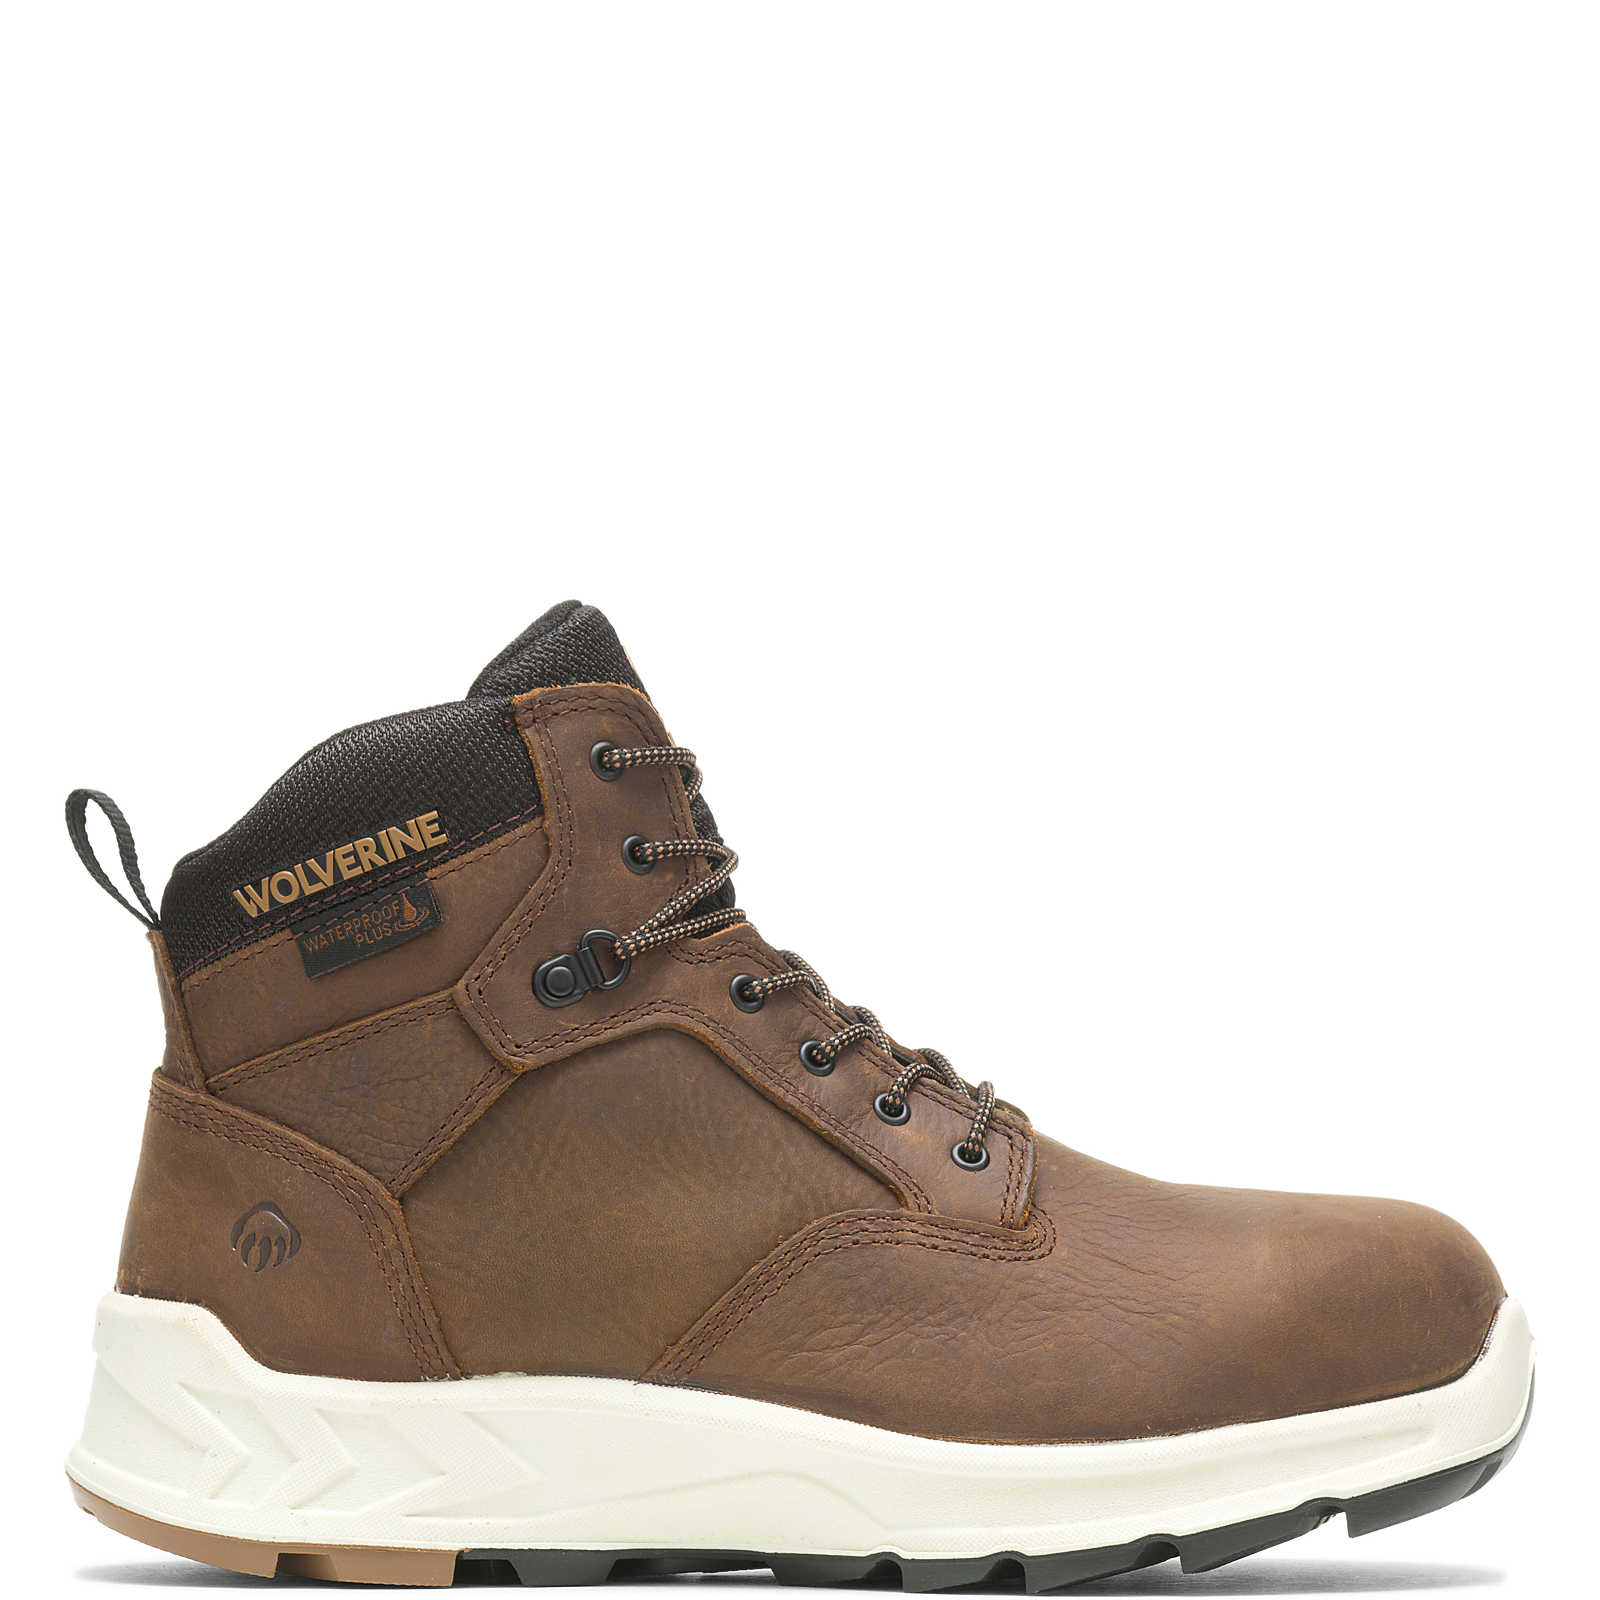 Wolverine Men's ShiftPLUS Work LX 6" Boots (Brown) $82.45, ShiftPLUS Work LX 6" Alloy-Toe Boots (Brown) $85.20 + Free Shipping